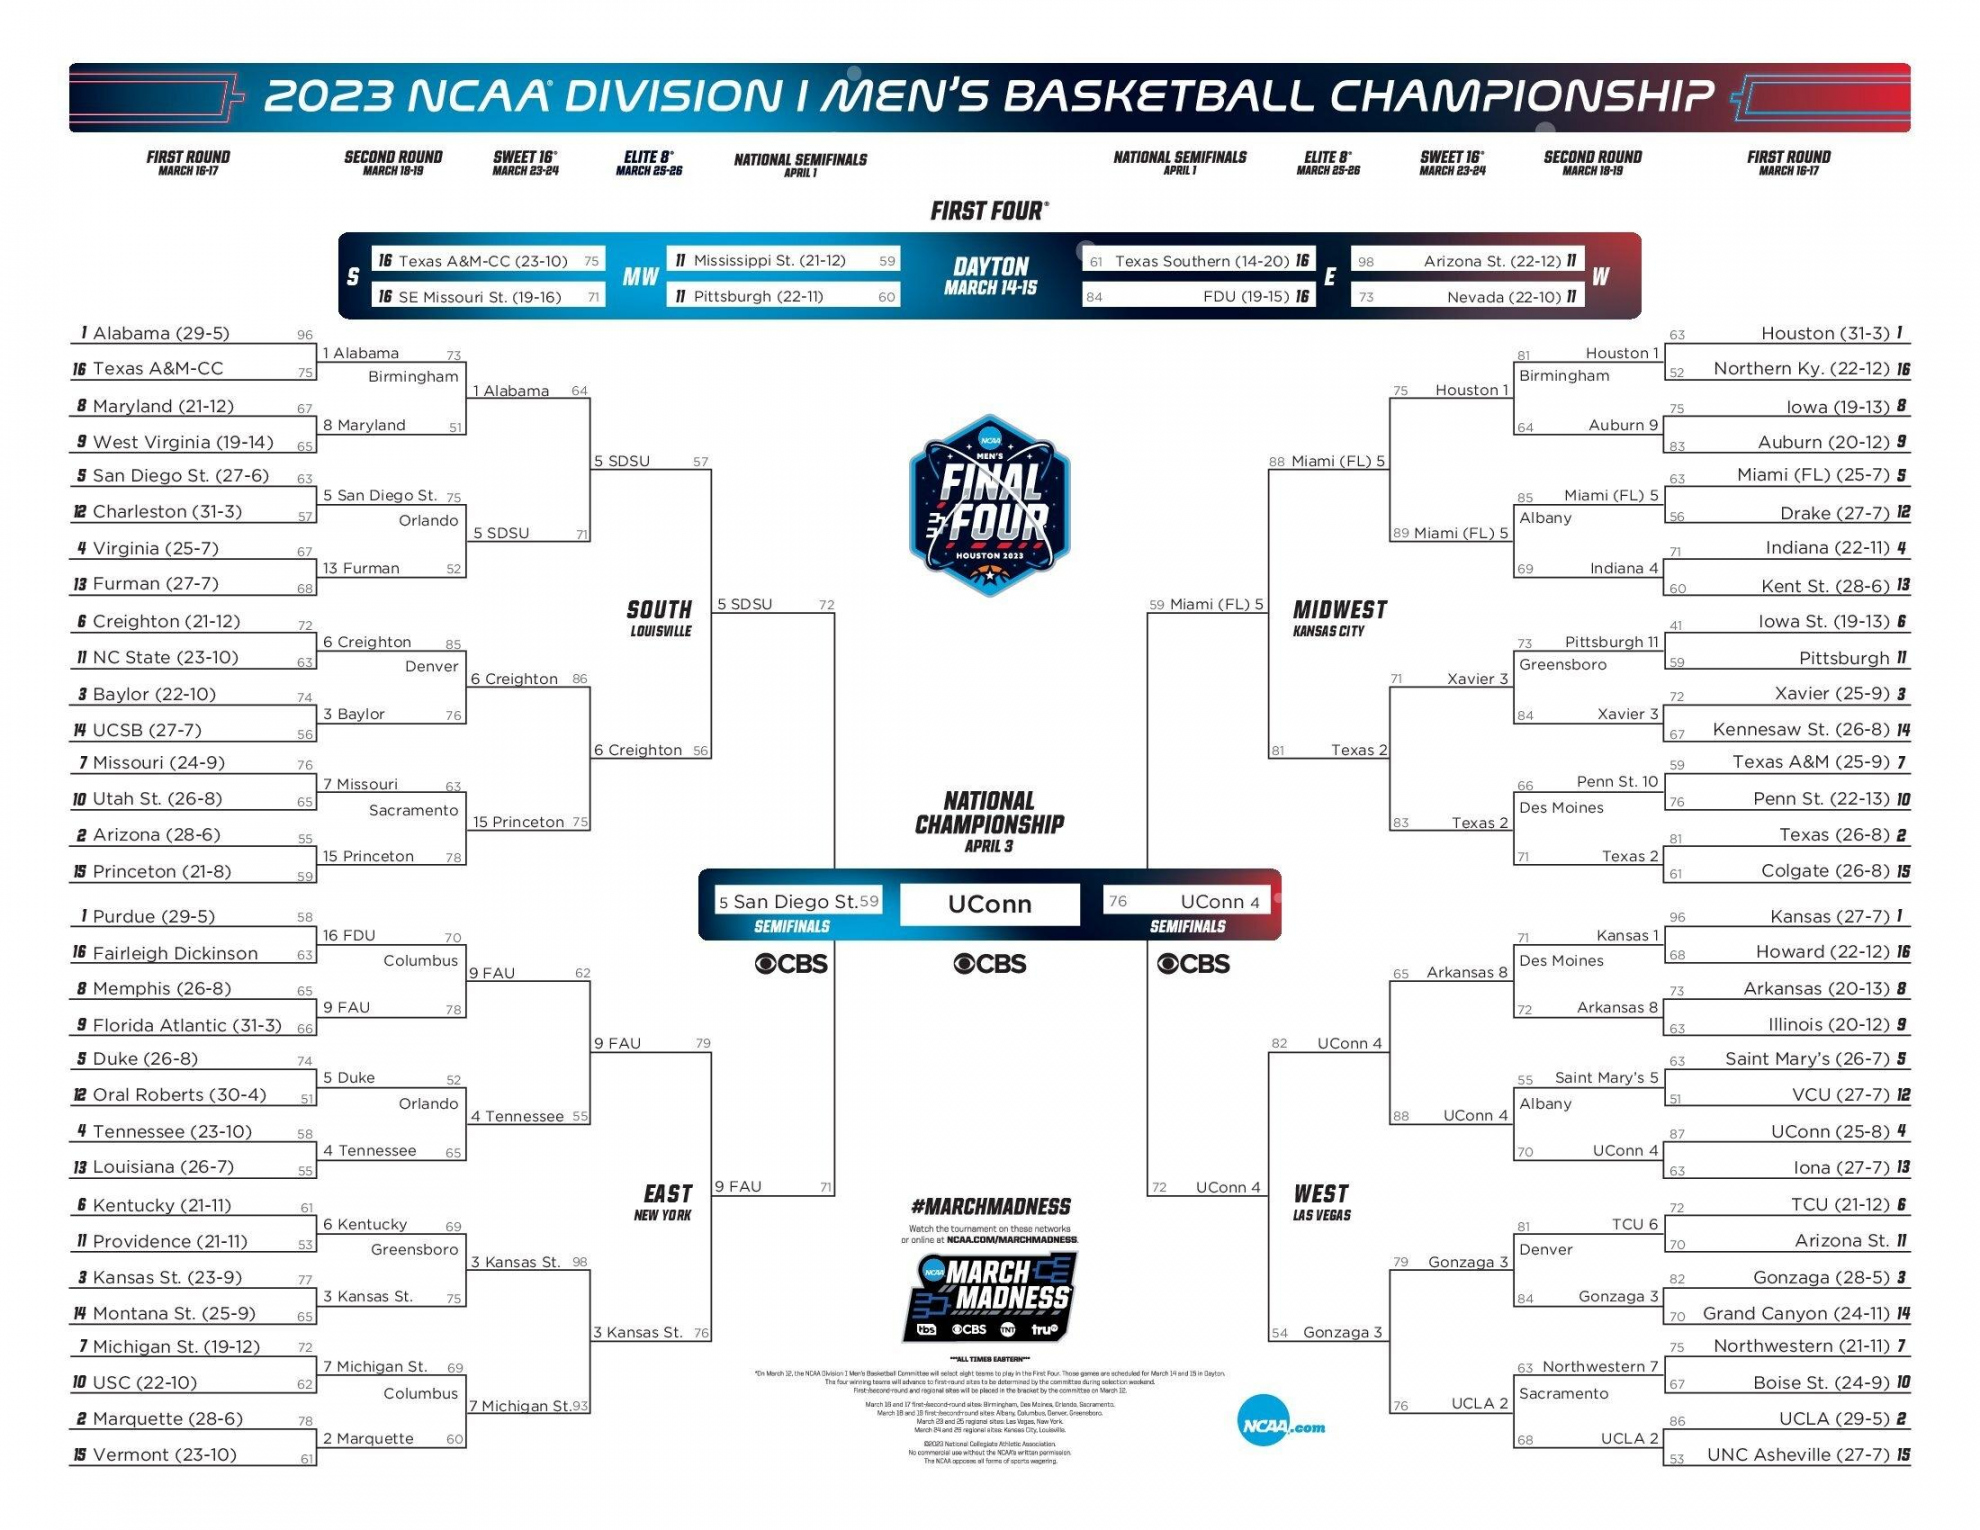 Free Printable March Madness Bracket 2023 - Printable - Latest bracket, schedule and scores for  NCAA men